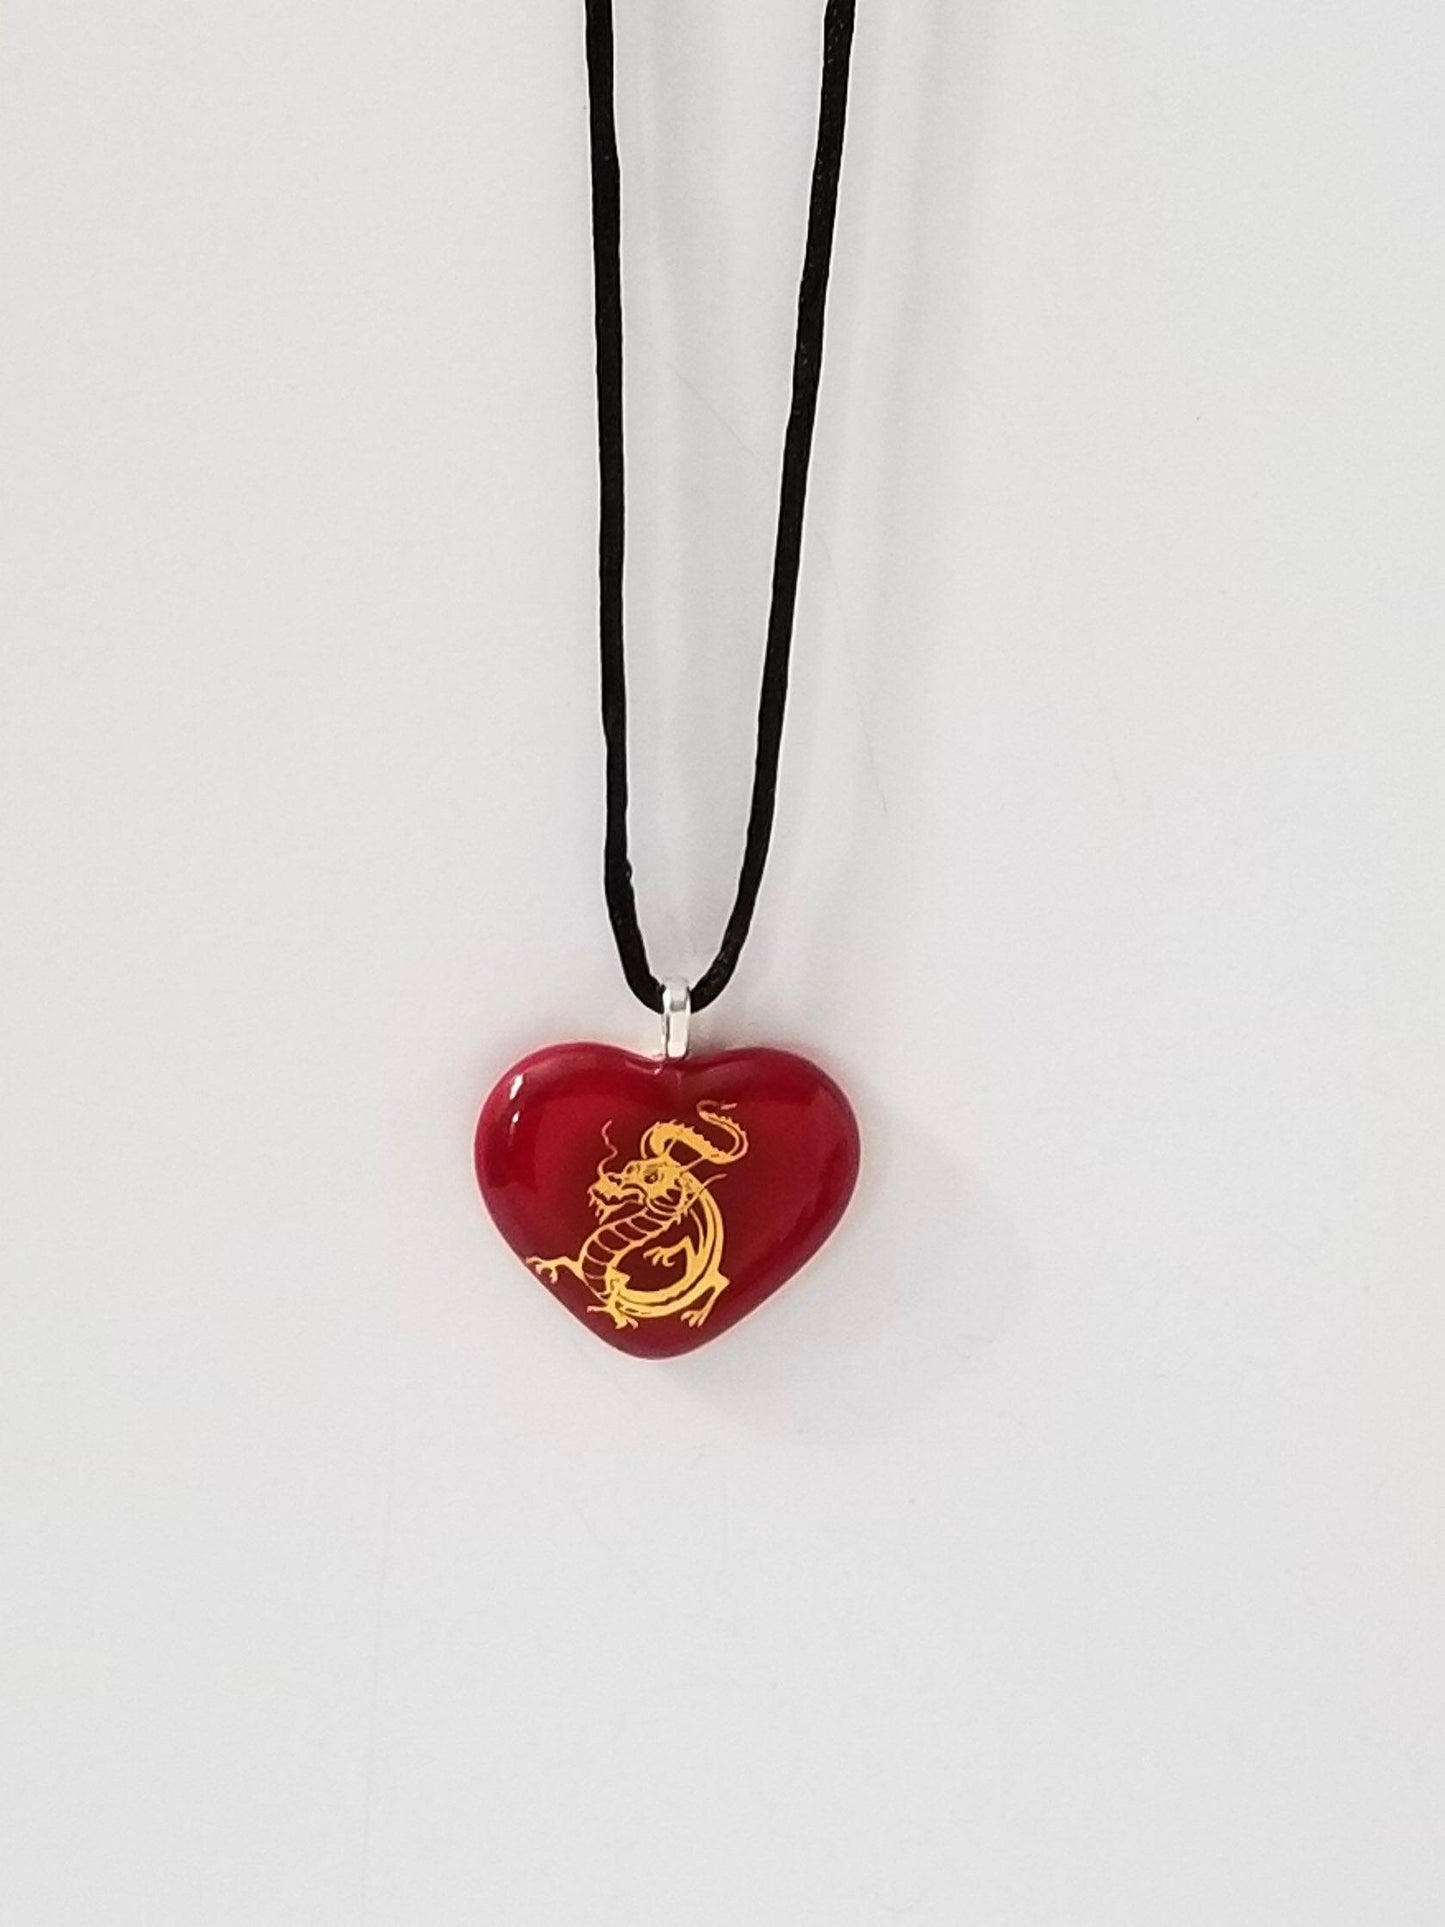 Gold Dragon on Red Heart Fused Glass Pendant from seeds glassworks